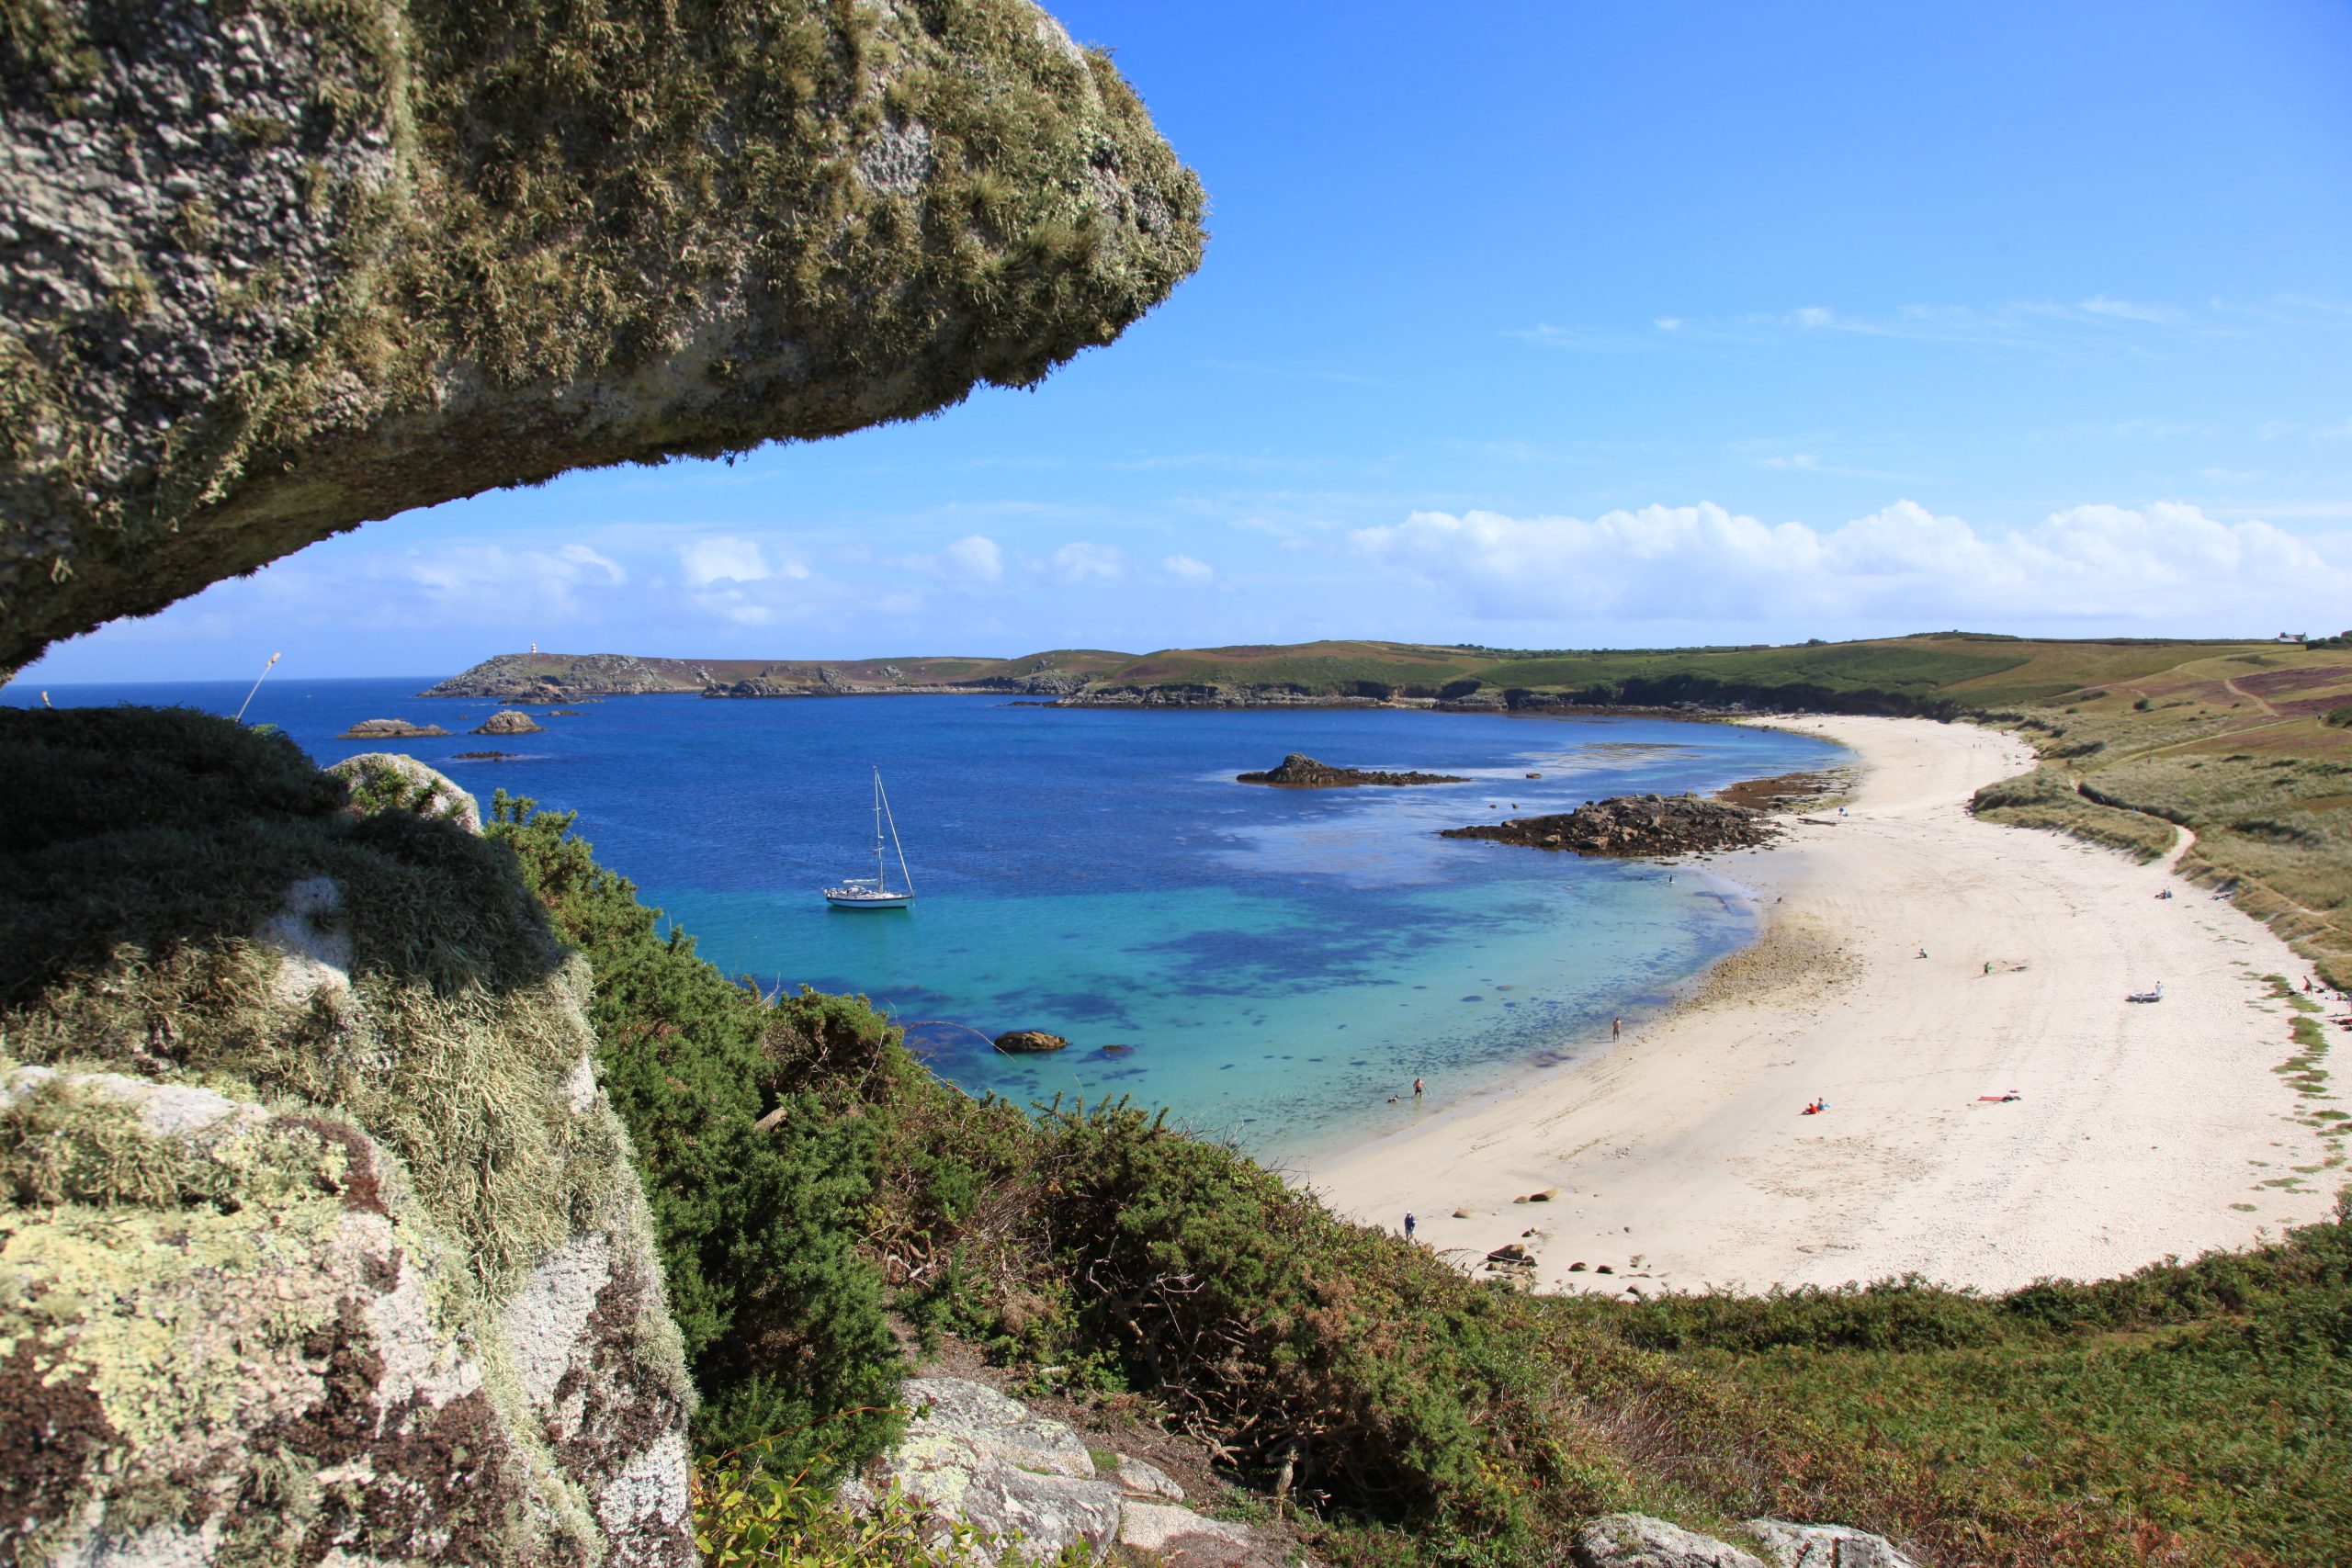 Ankern bei St. Martin Isles of Scilly